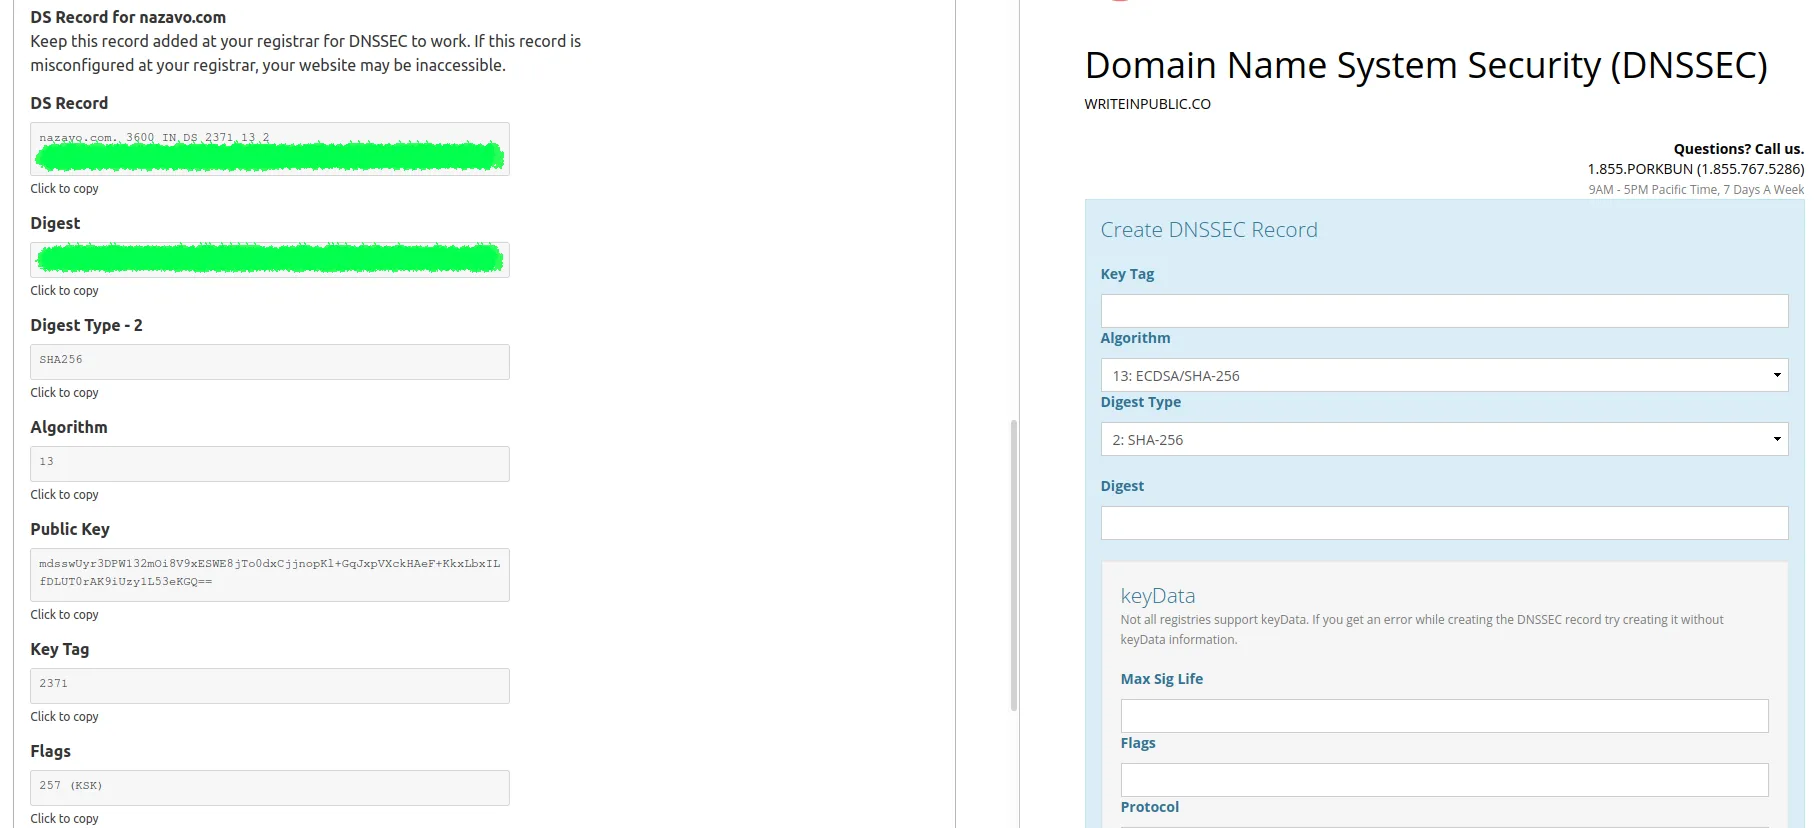 screenshot of CloudFlare's and Porkbun's DNSSEC configuration/creation pages